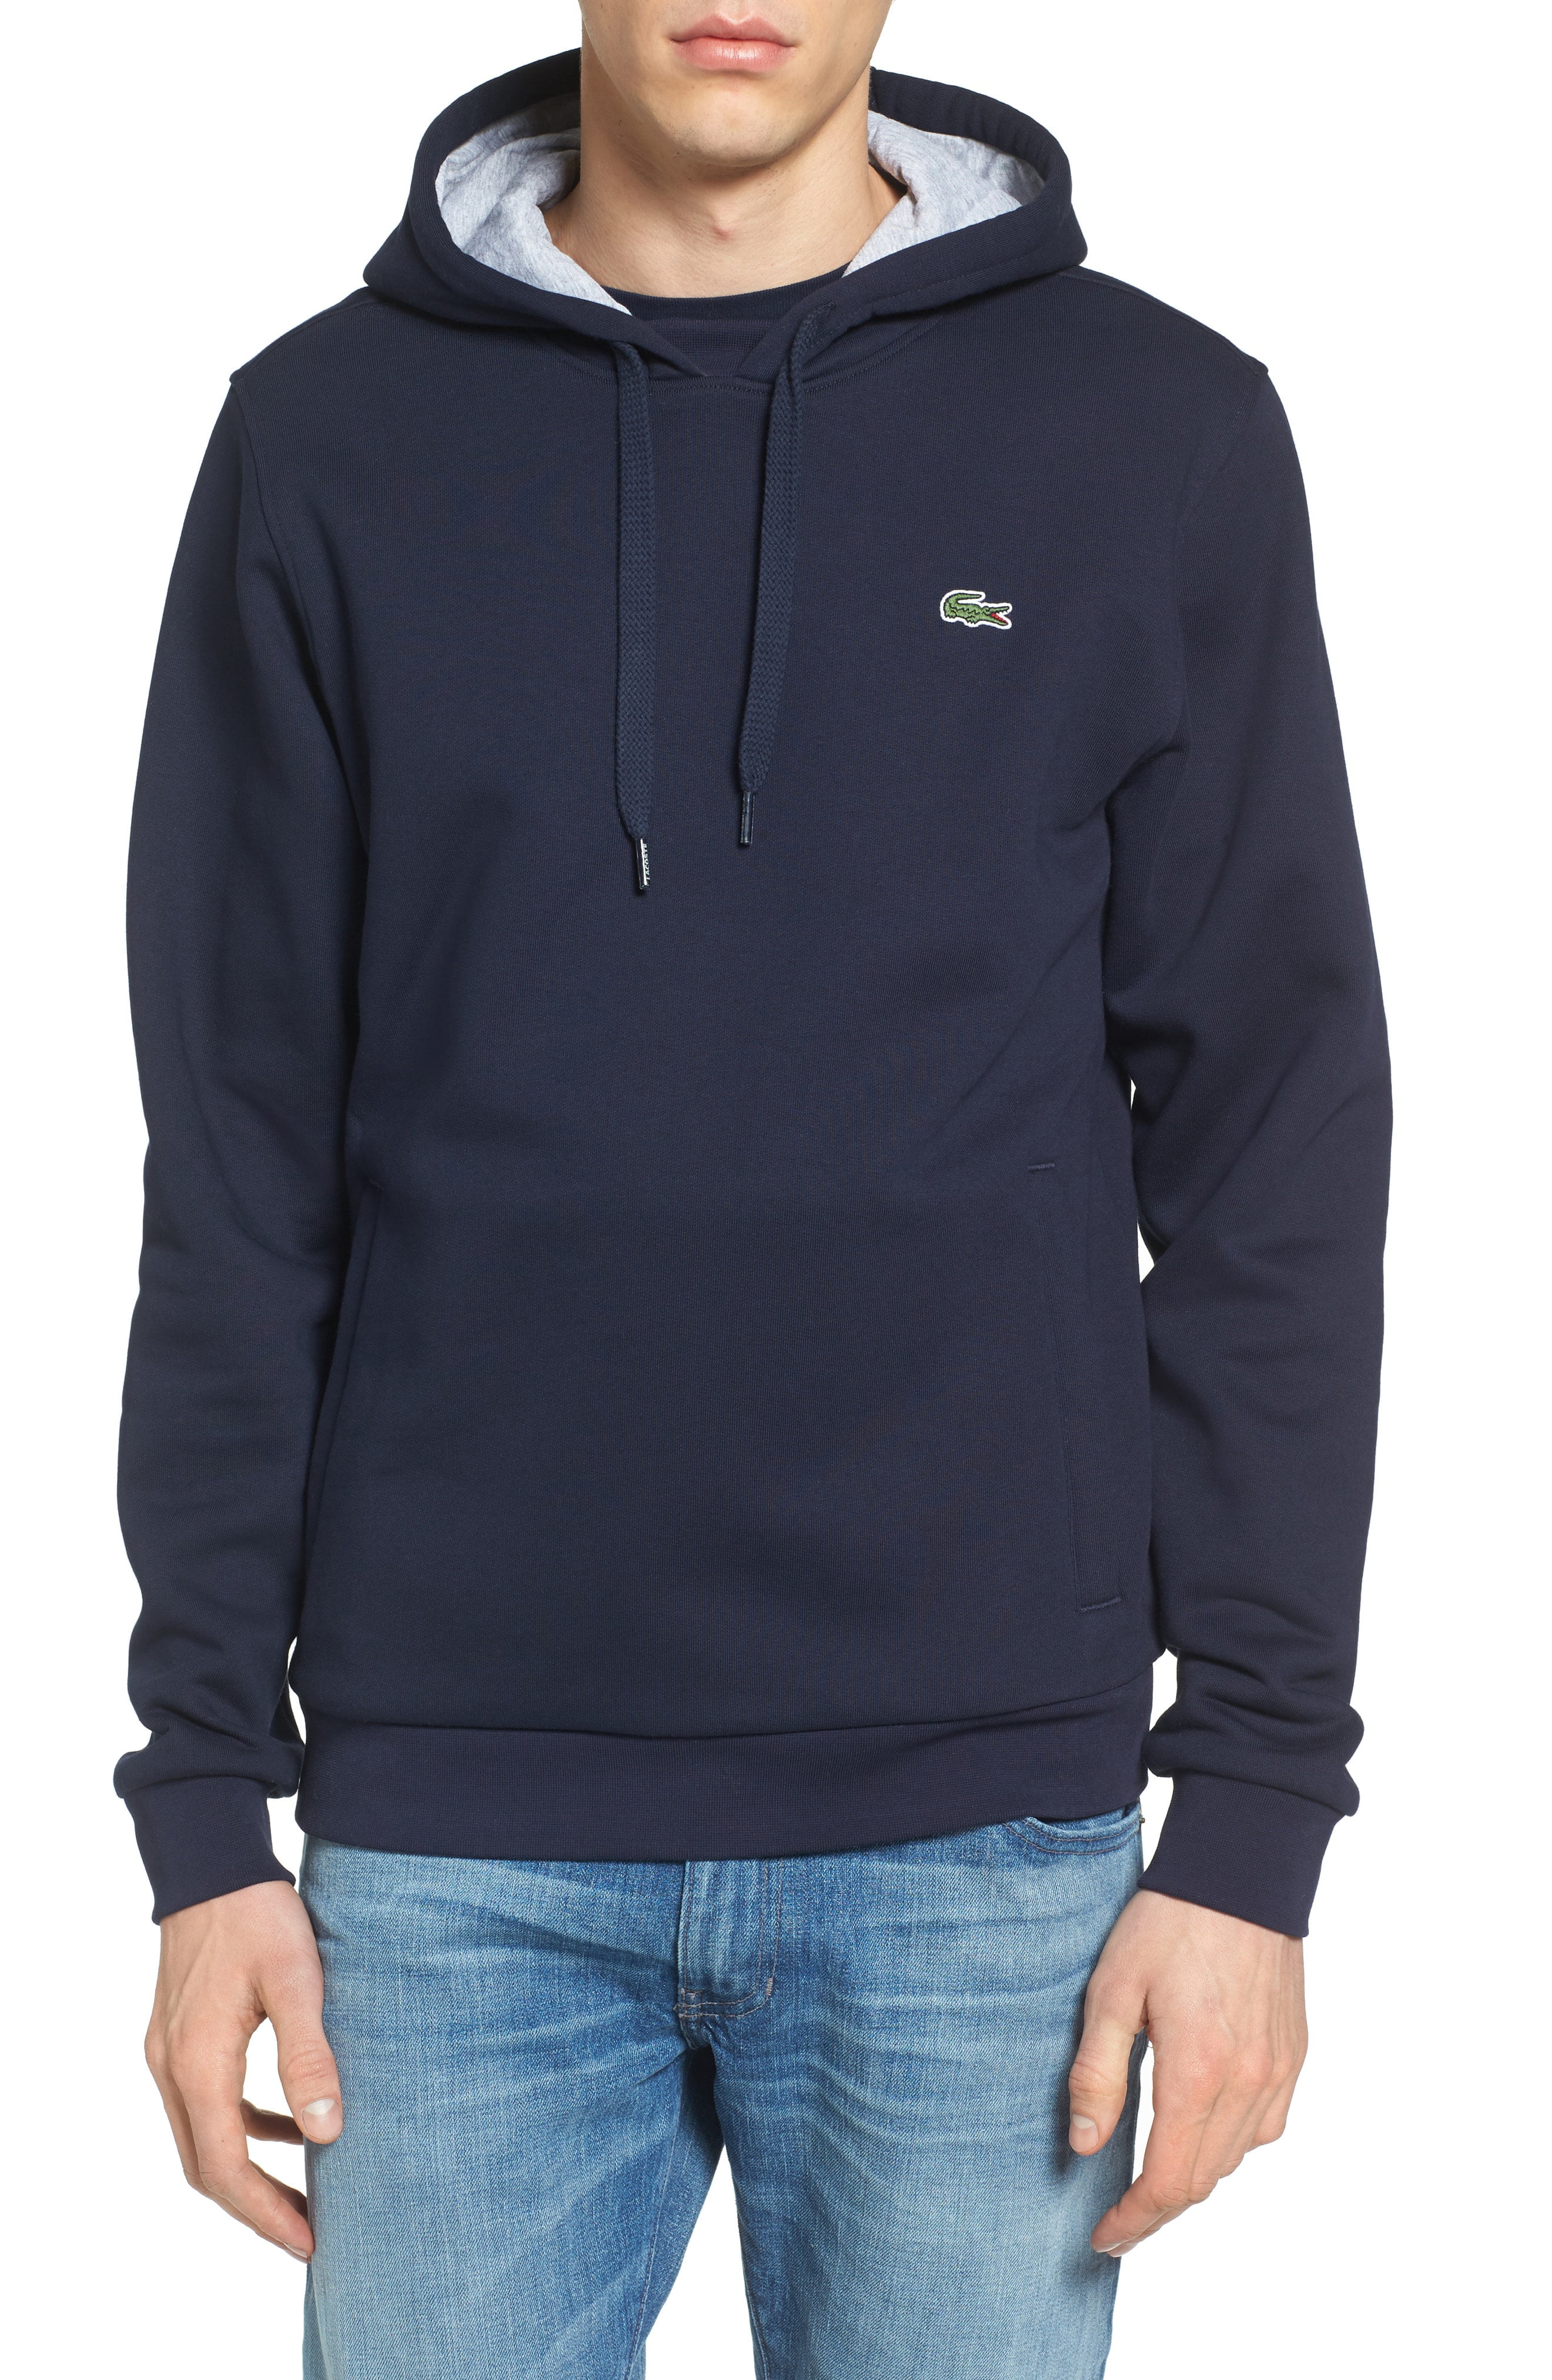 Lacoste Sweaters - Sport Mens Sweater Hooded Pullover Drawstring 4XLT ...